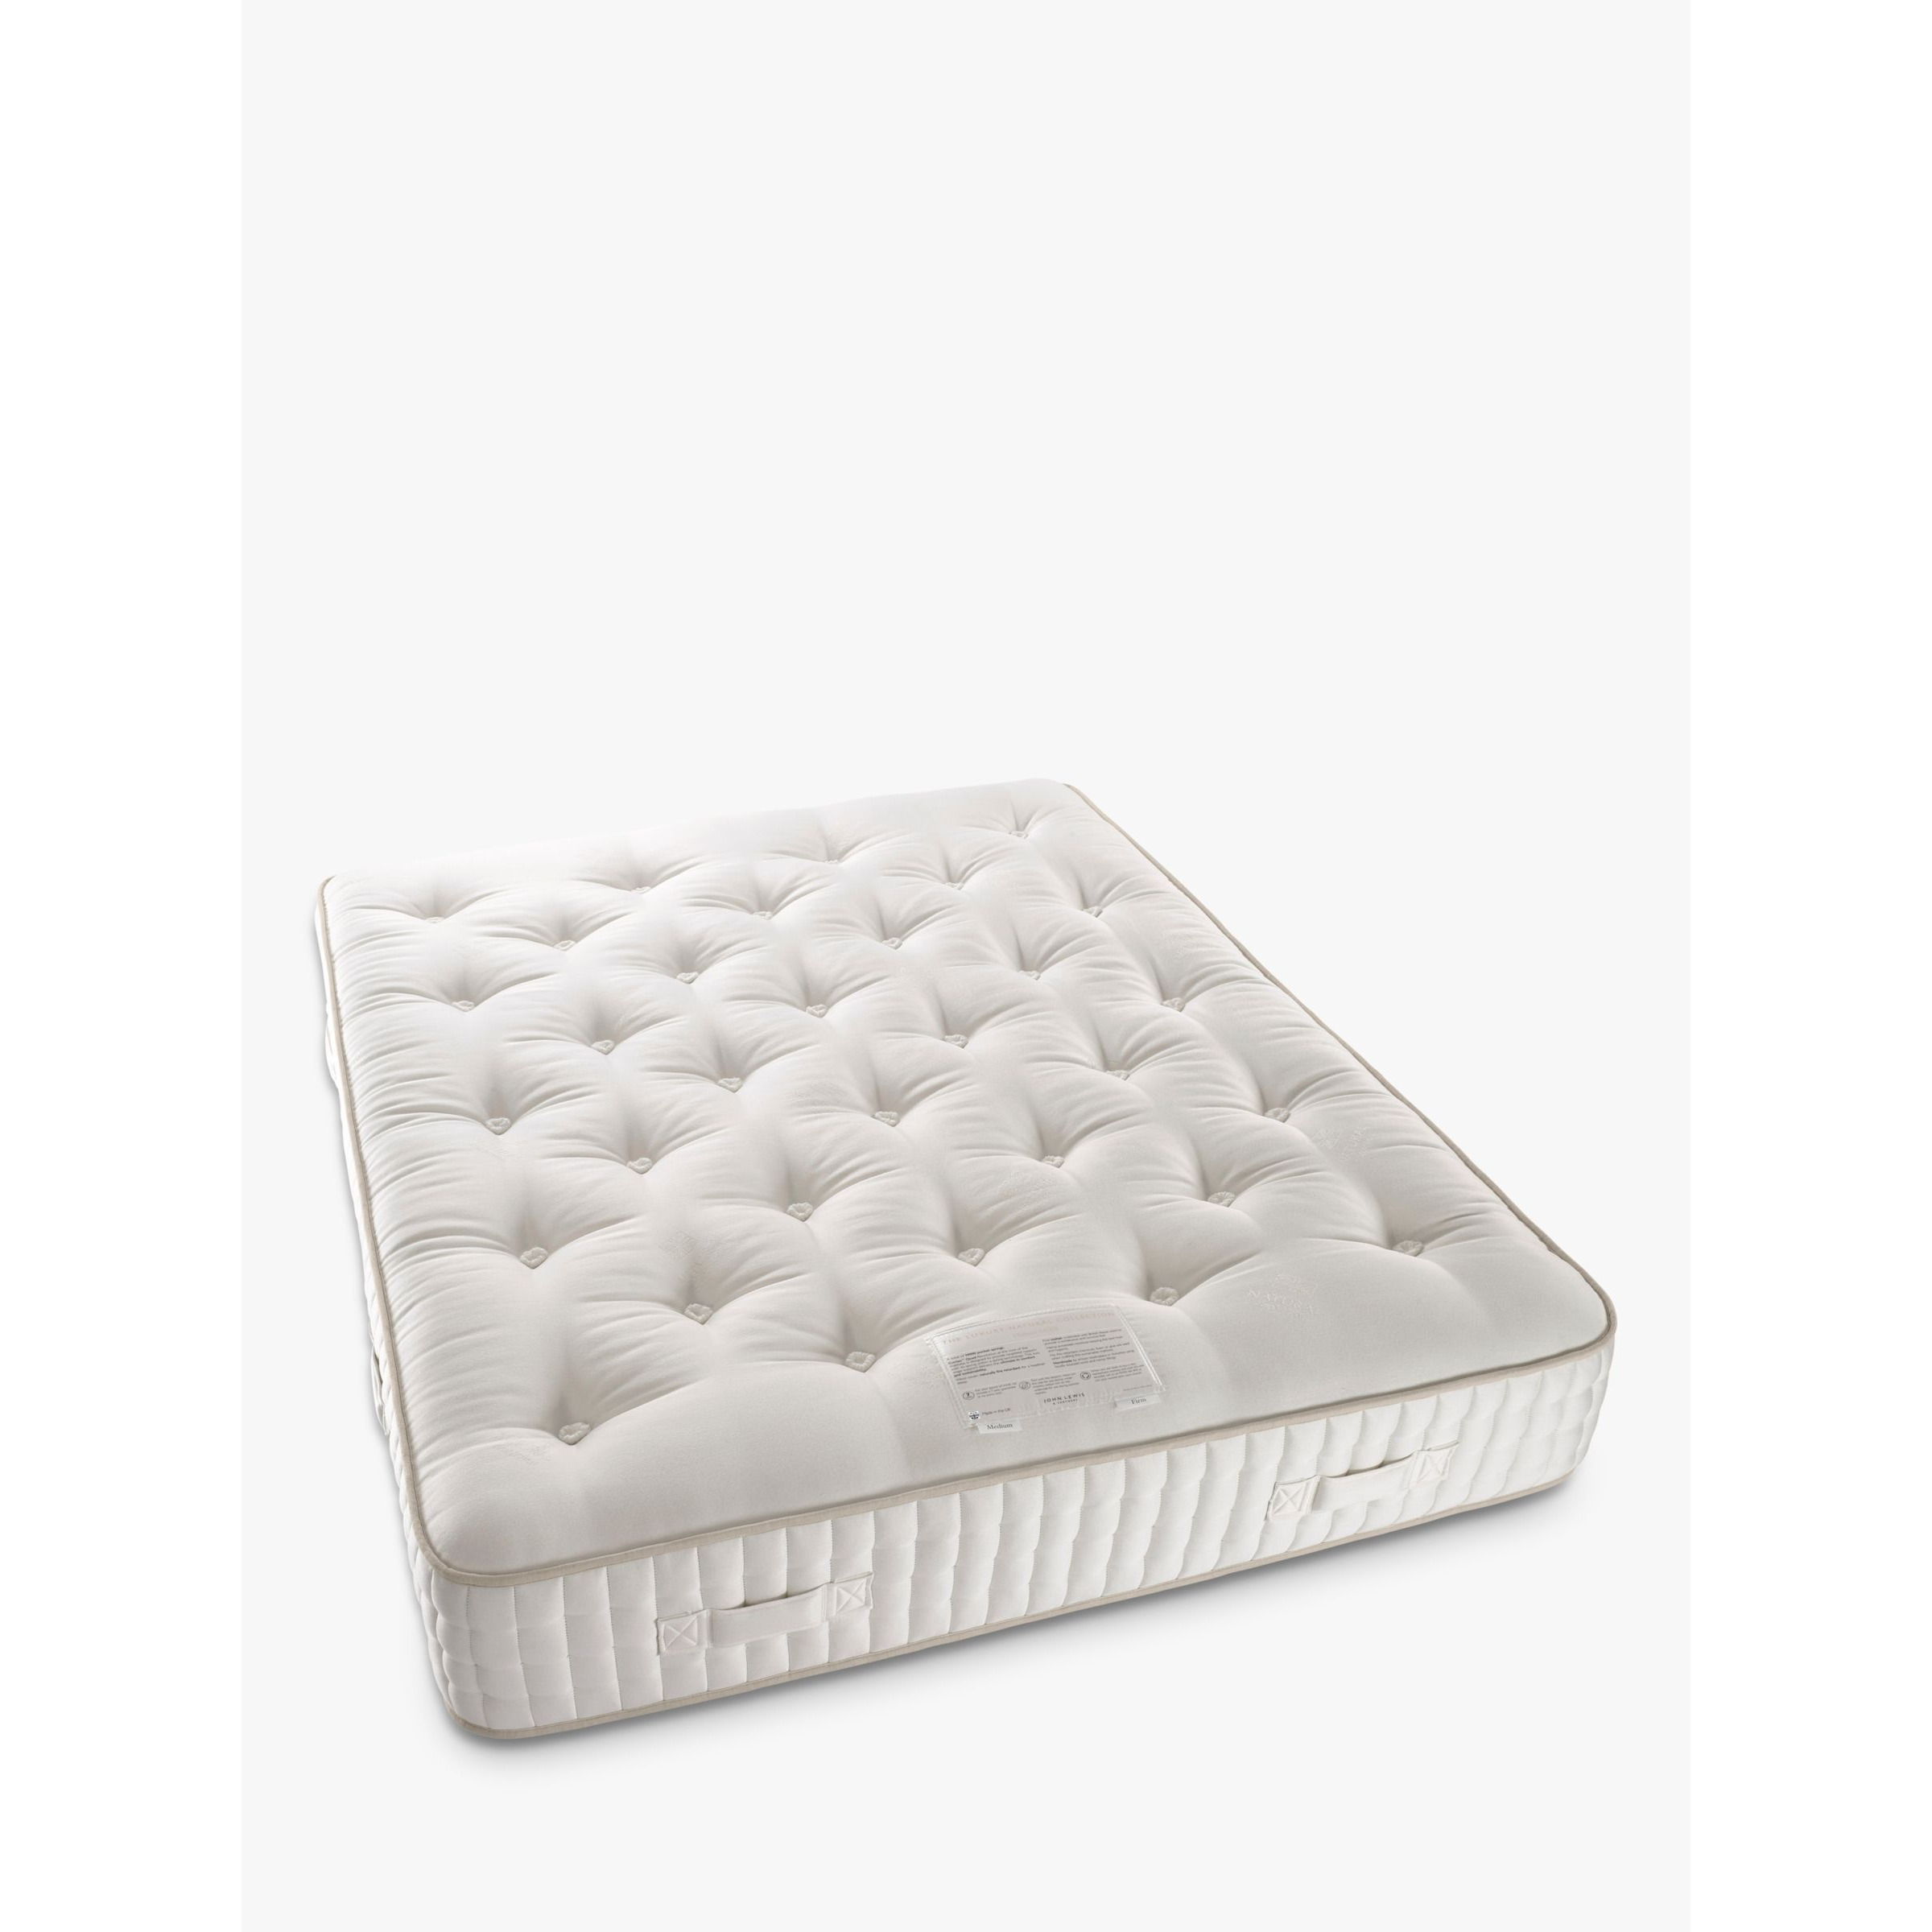 John Lewis Luxury Natural Collection Mohair 14000, Small Double, Regular Tension Pocket Spring Mattress - image 1